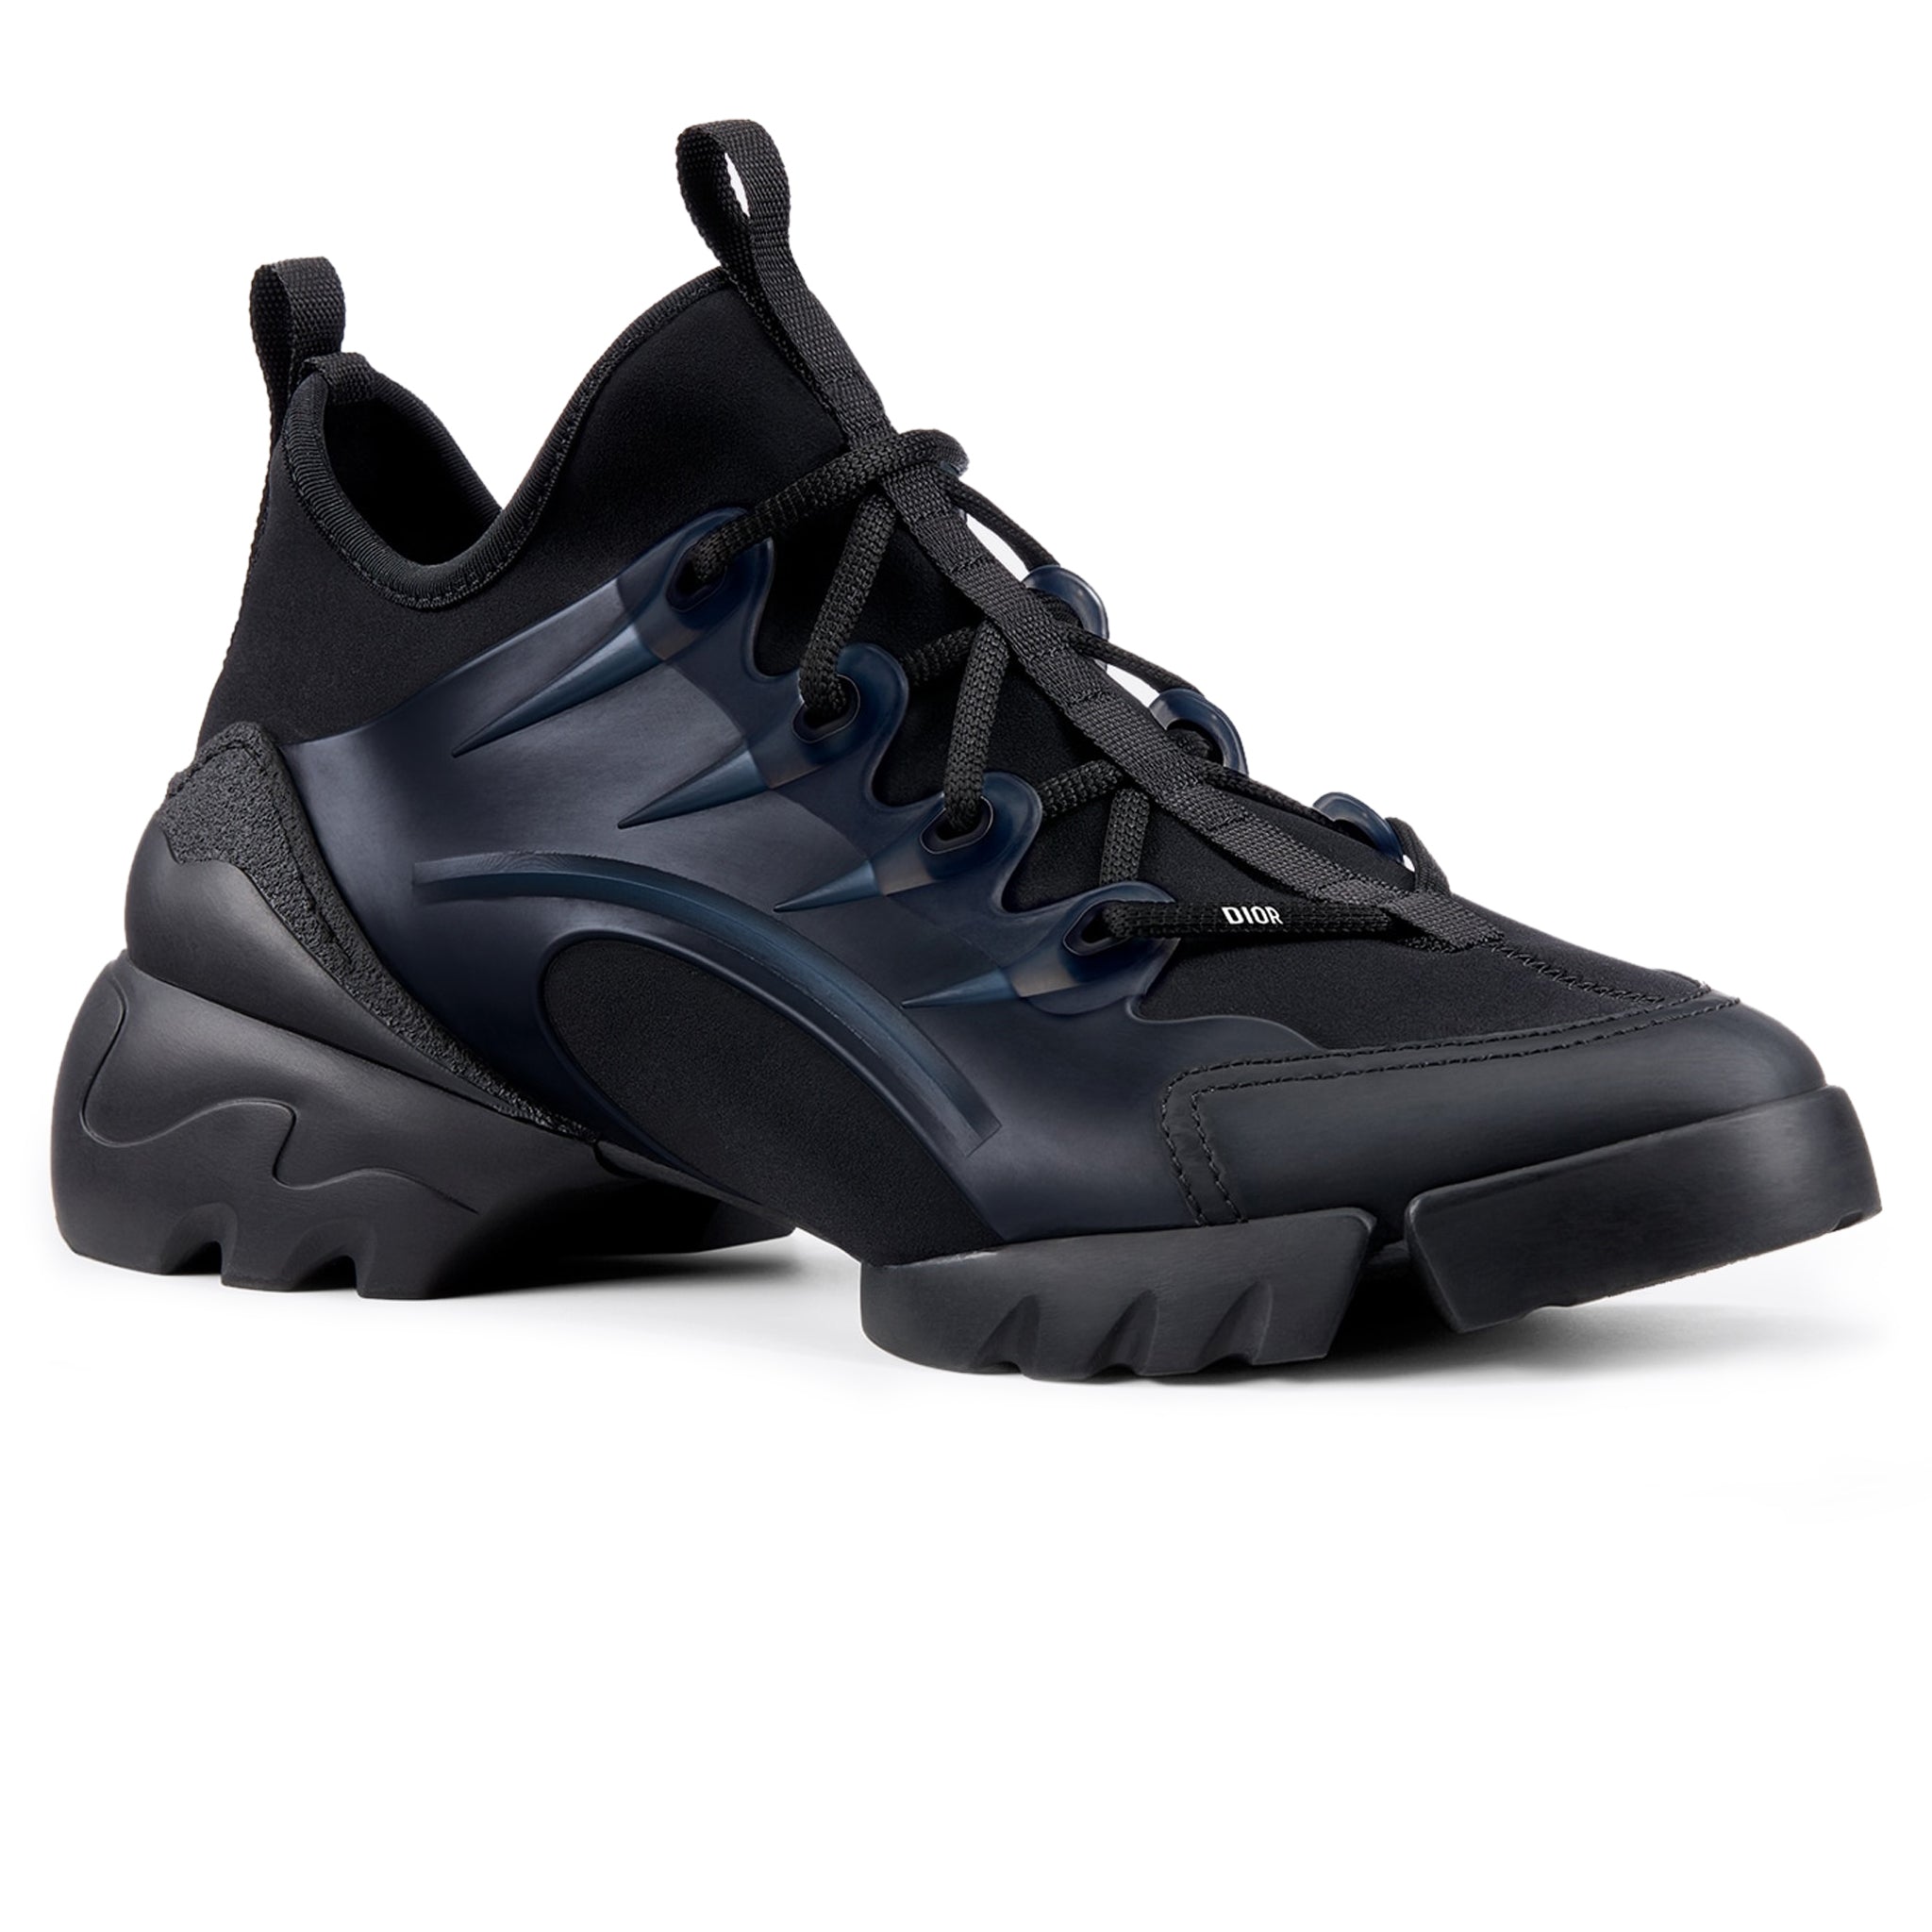 DConnect Sneaker Black Technical Fabric  DIOR HR